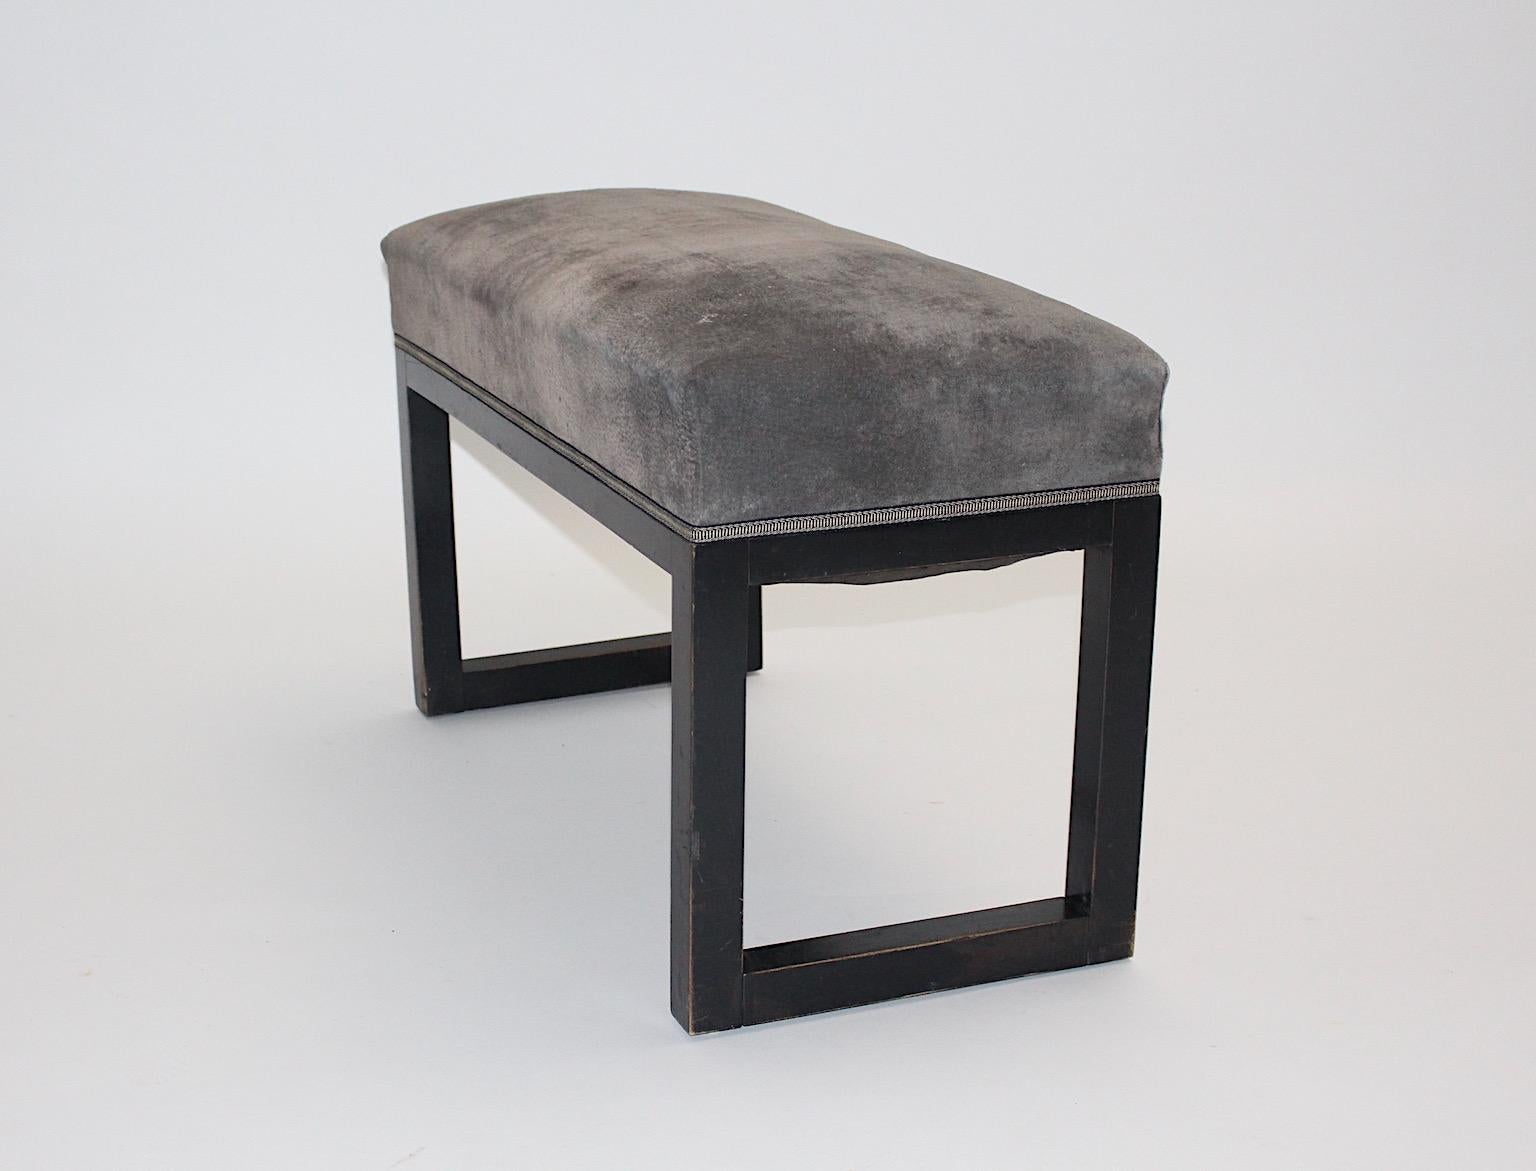 Jugendstil black beech grey suede leather bench designed by Josef Hoffmann circa 1905, Vienna.
A gorgeous bench by Josef Hoffmann with a black stained solid beechwood frame and the upholstery is covered with grey suede leather.
Good original vintage